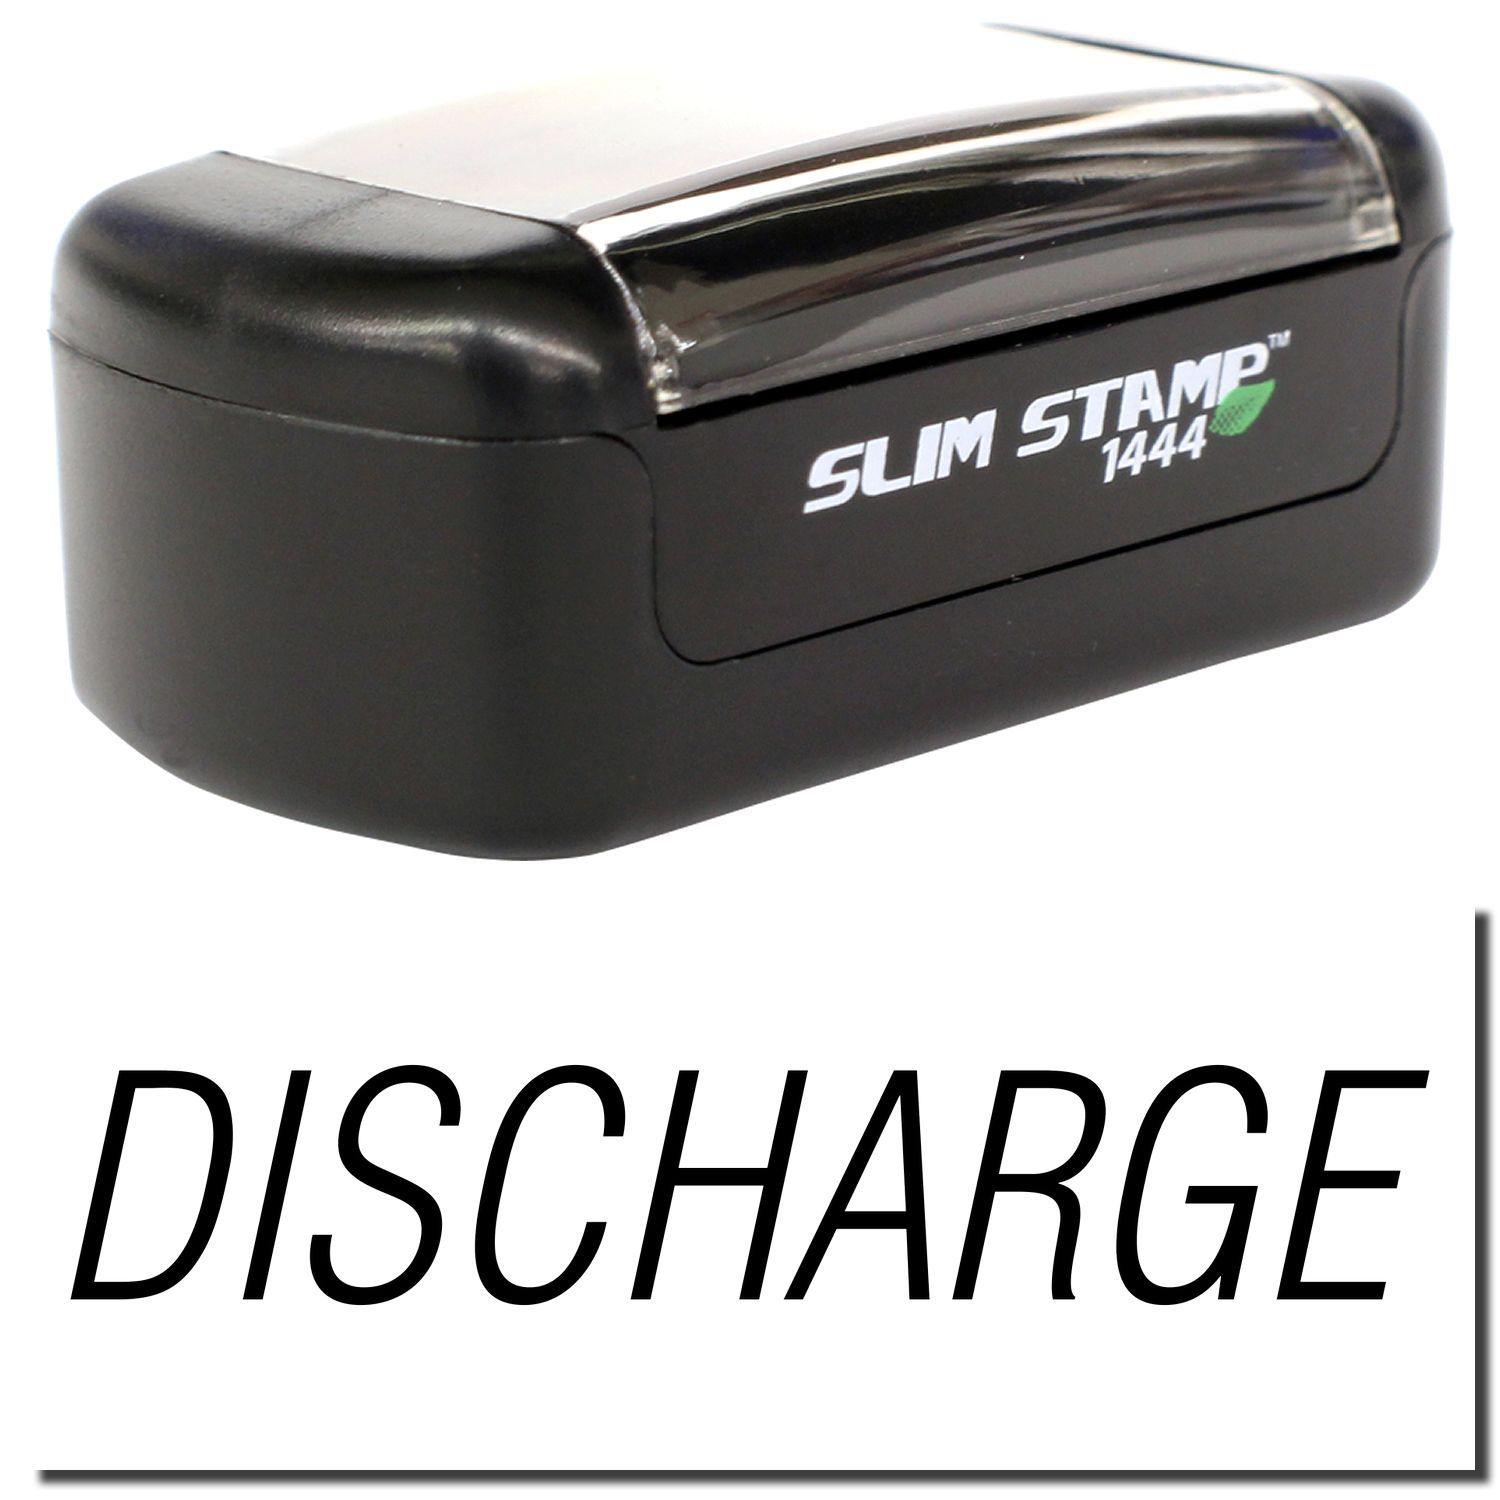 A stock office pre-inked stamp with a stamped image showing how the text "DISCHARGE" is displayed after stamping.